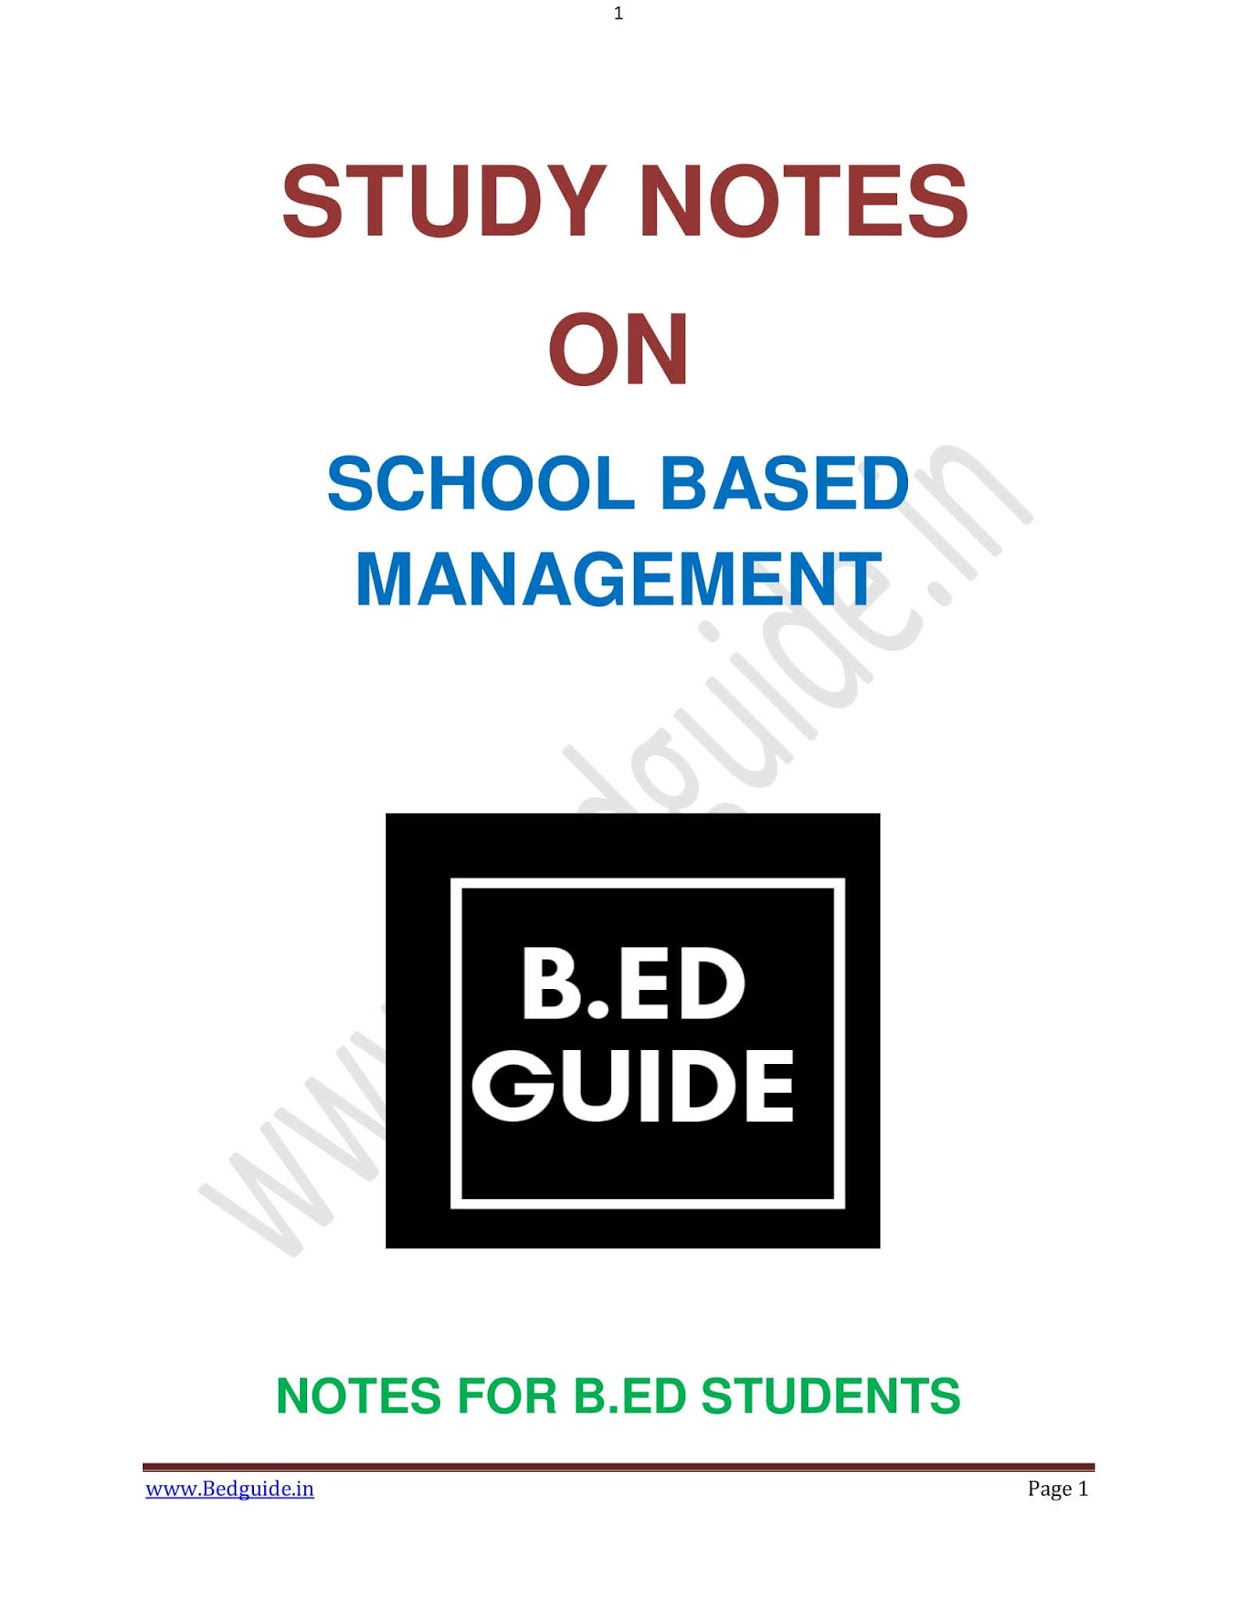 importance of case study b.ed notes